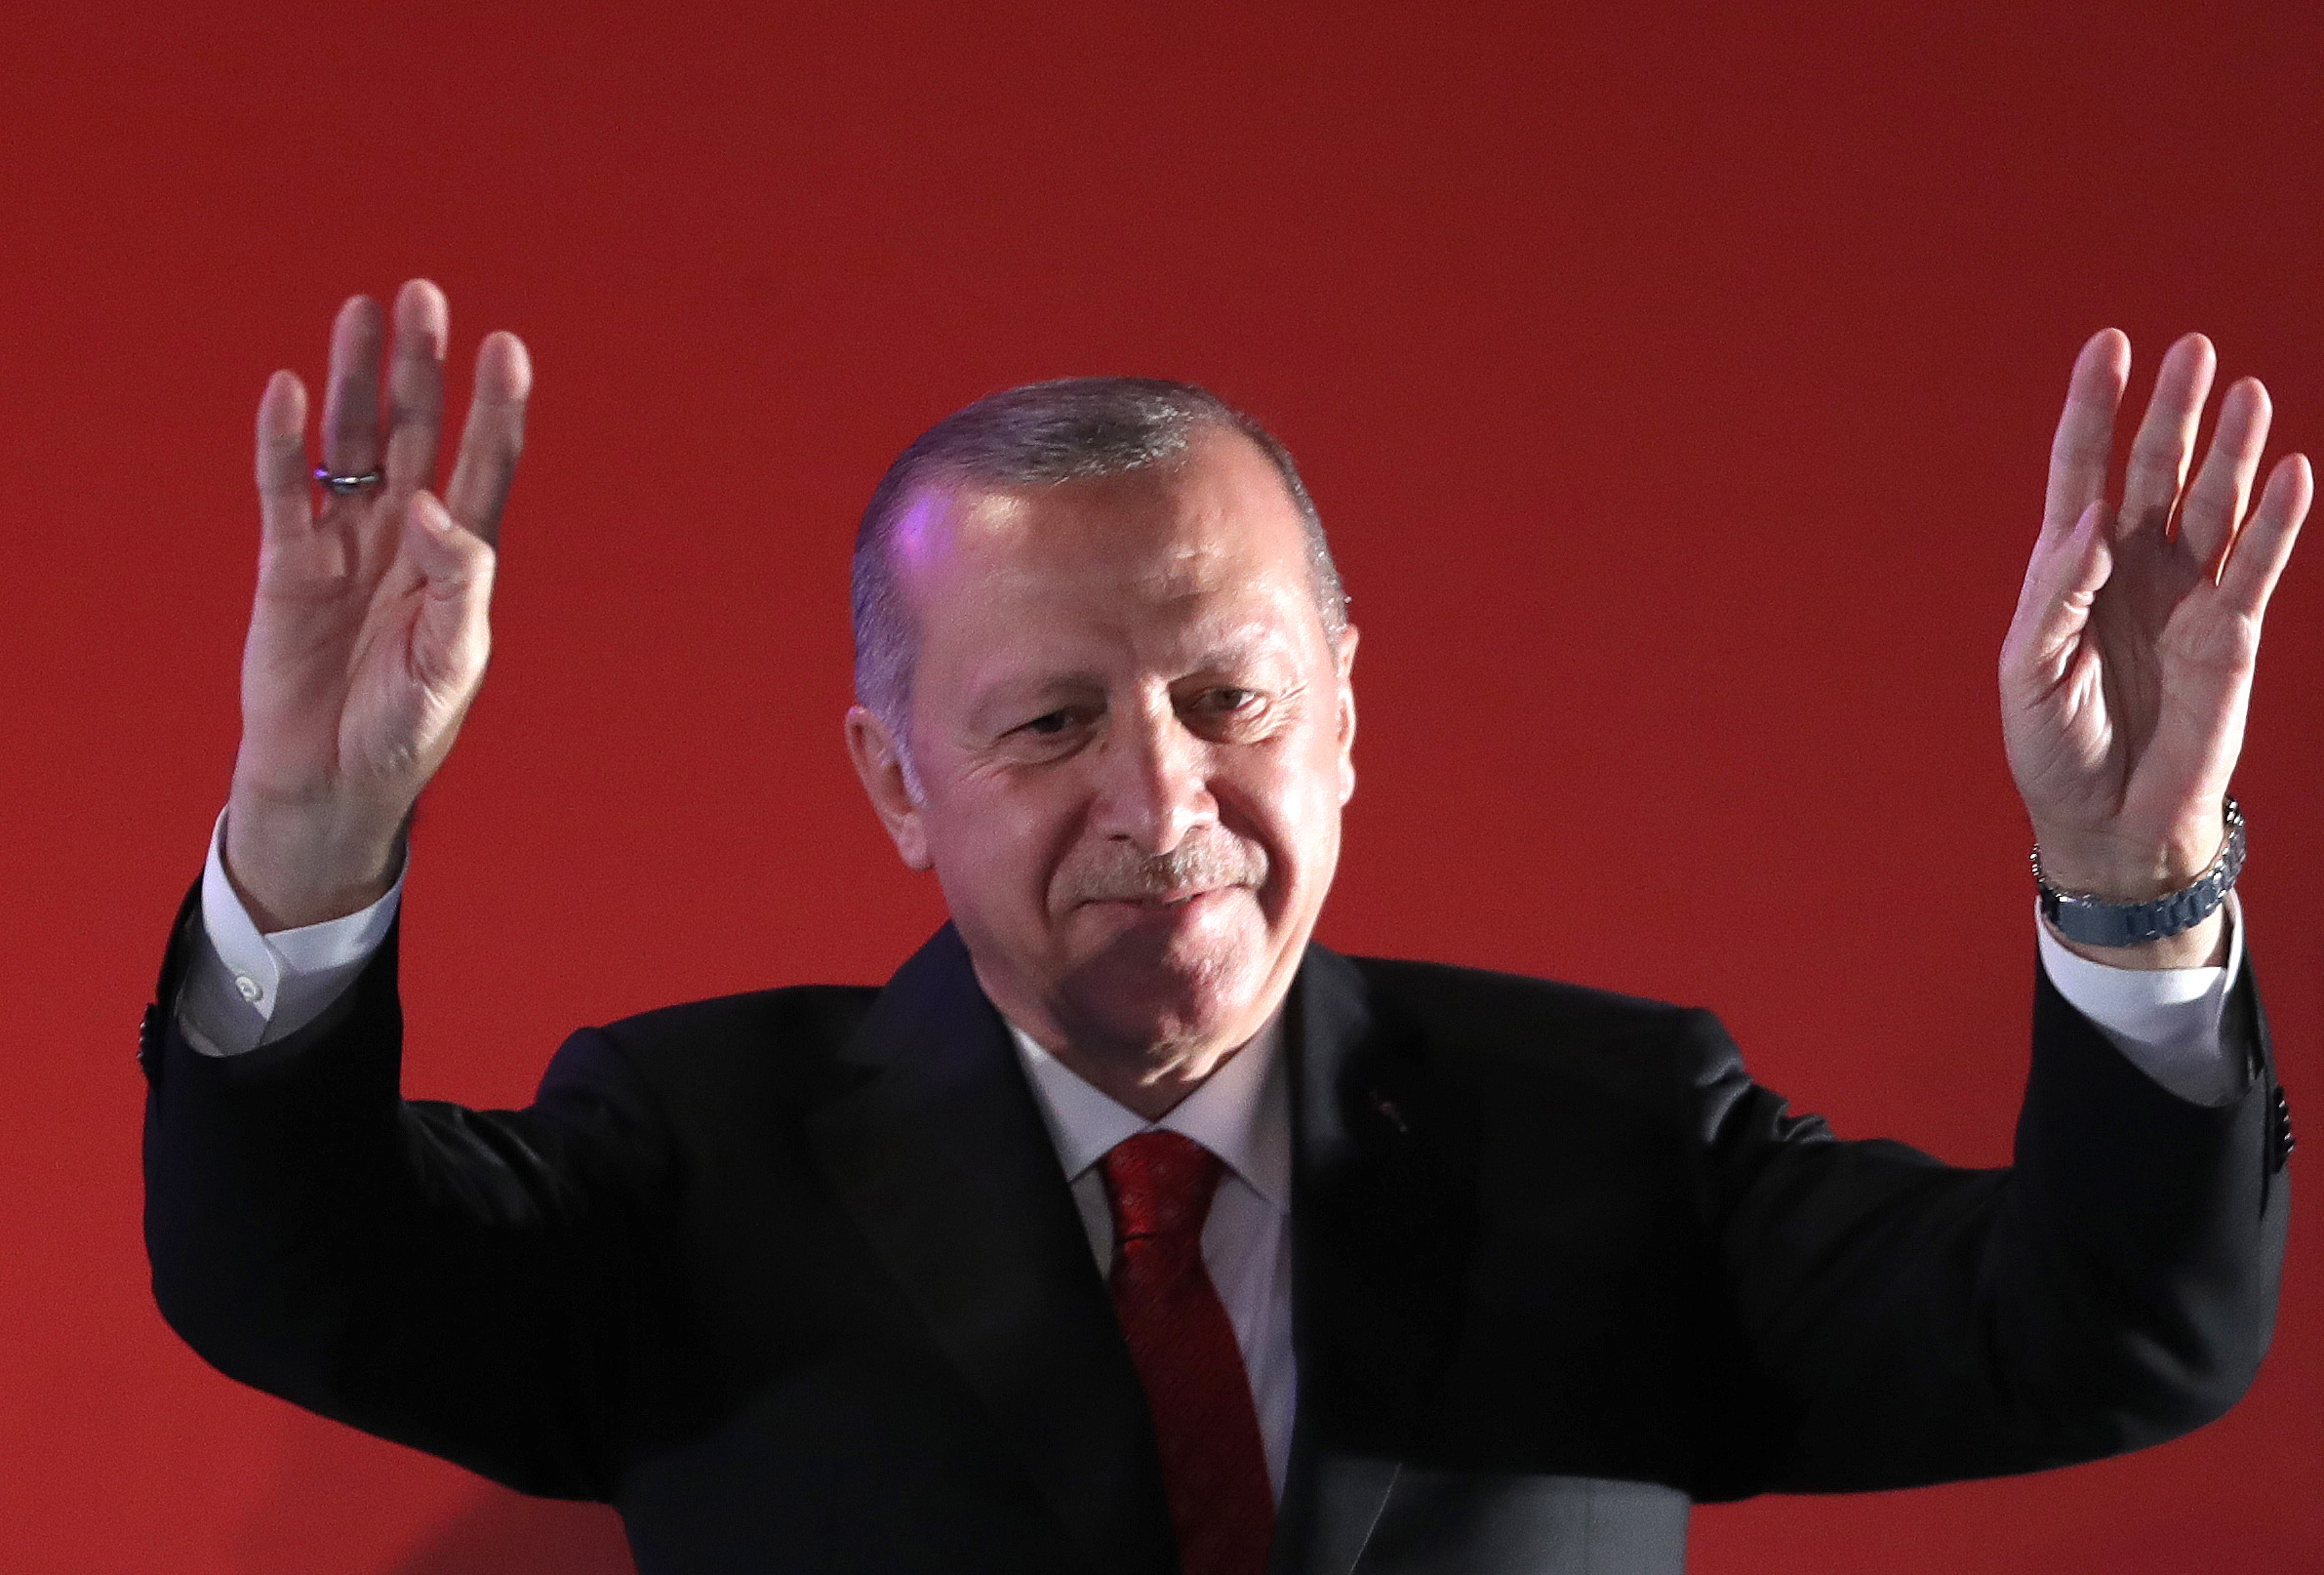 epa07719299 Turkish President Recep Tayyip Erdogan greets to people during a rally marking the third anniversary of the failed coup attempt, at the Ataturk Airport in Istanbul, Turkey, 15 July 2019. Turkey marks the third anniversary of the failed coup attempt which led to some 50 thousand workers being dismissed, some eight thousand people arrested, and scores of news outlets shut down by the government. Turkish military factions on 15 July 2016 attempted a coup for which Turkish President Recep Tayyip Erdogan blamed US-based Turkish cleric Fethullah Gulen and his movement to allegedly have masterminded the attempt.  EPA/ERDEM SAHIN